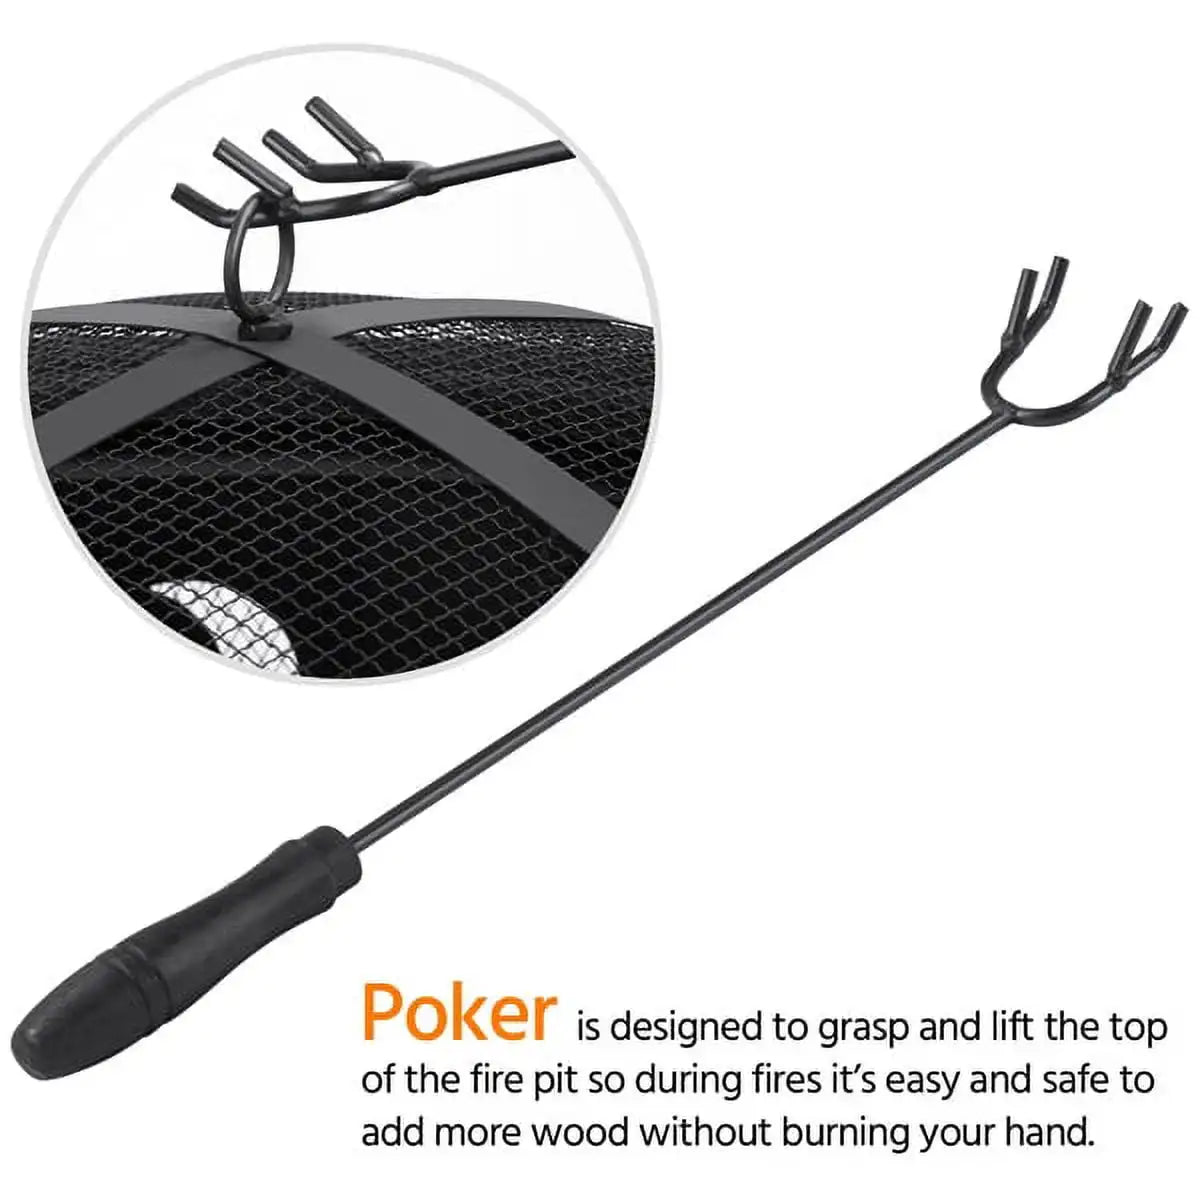 Iron Fire Pit Set Camping Heating Equipment with Poker Mesh Cover Outdoor Backyard Patio